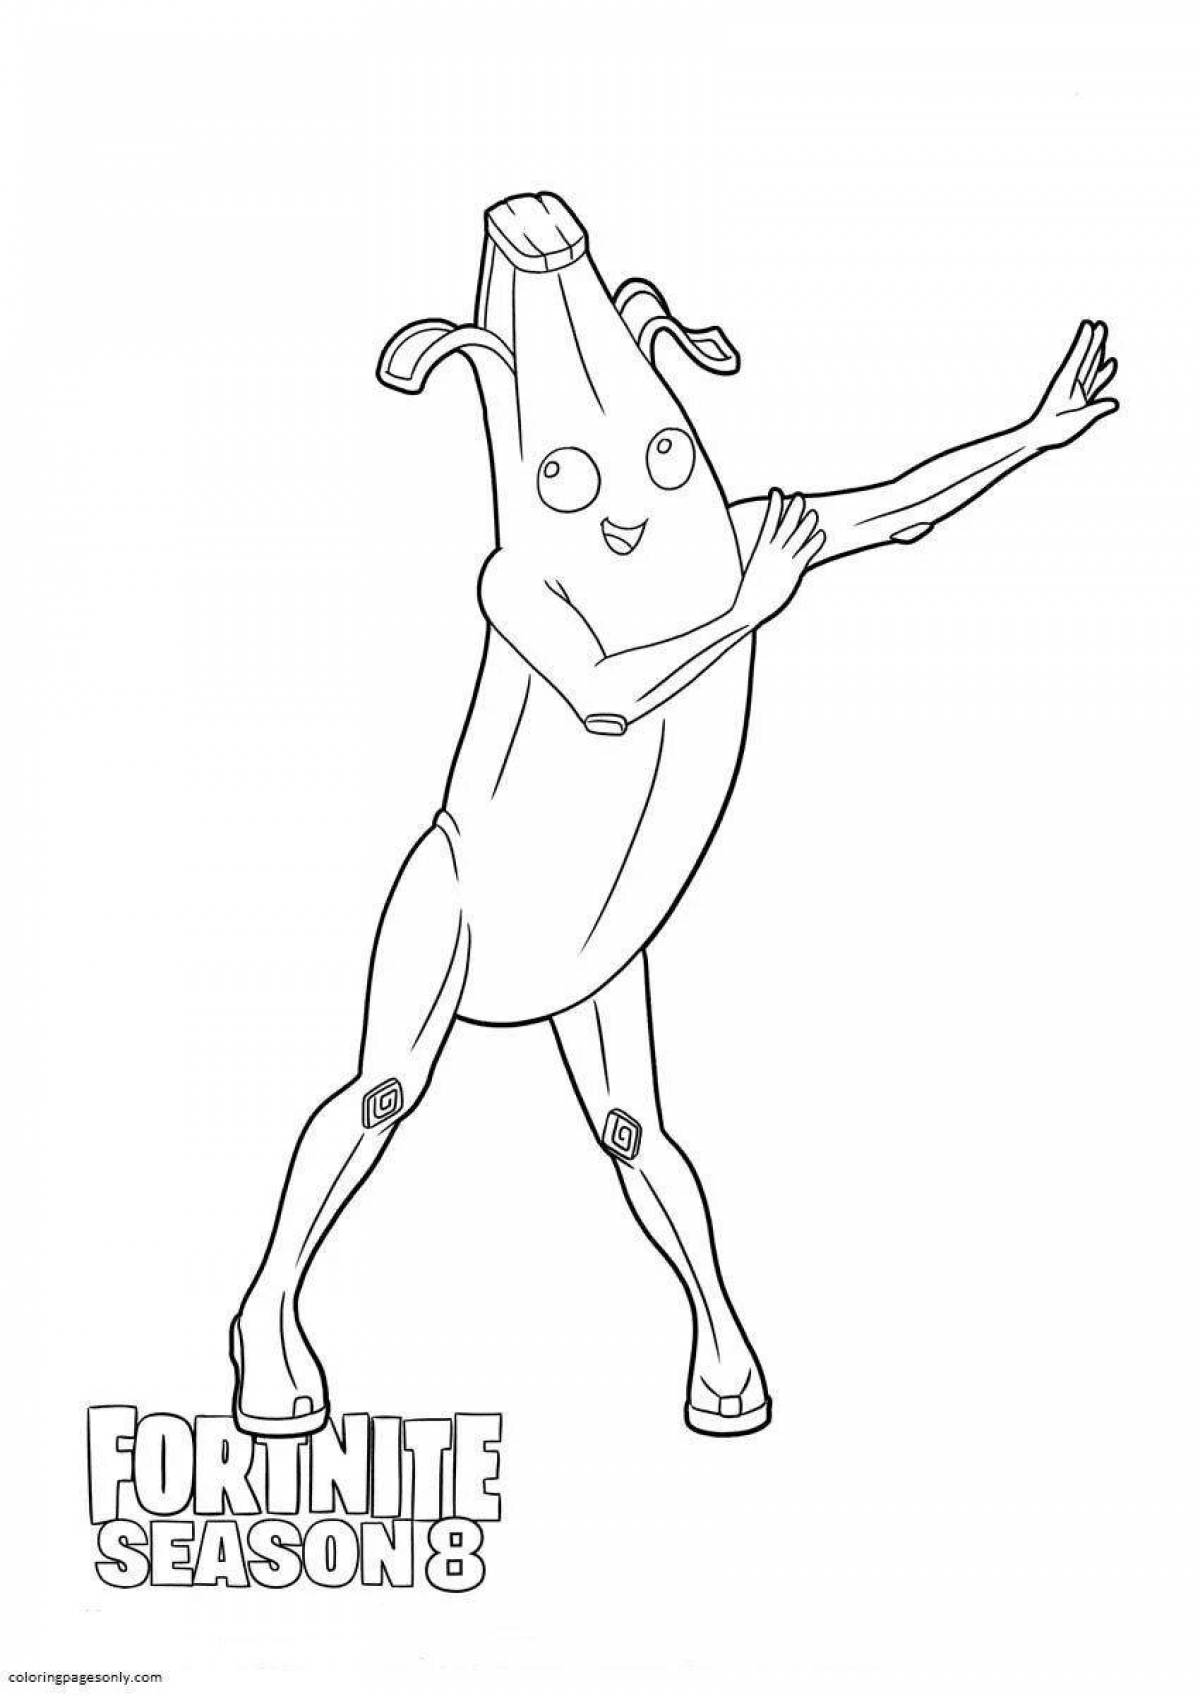 Color-frenzy banana fortnite coloring page